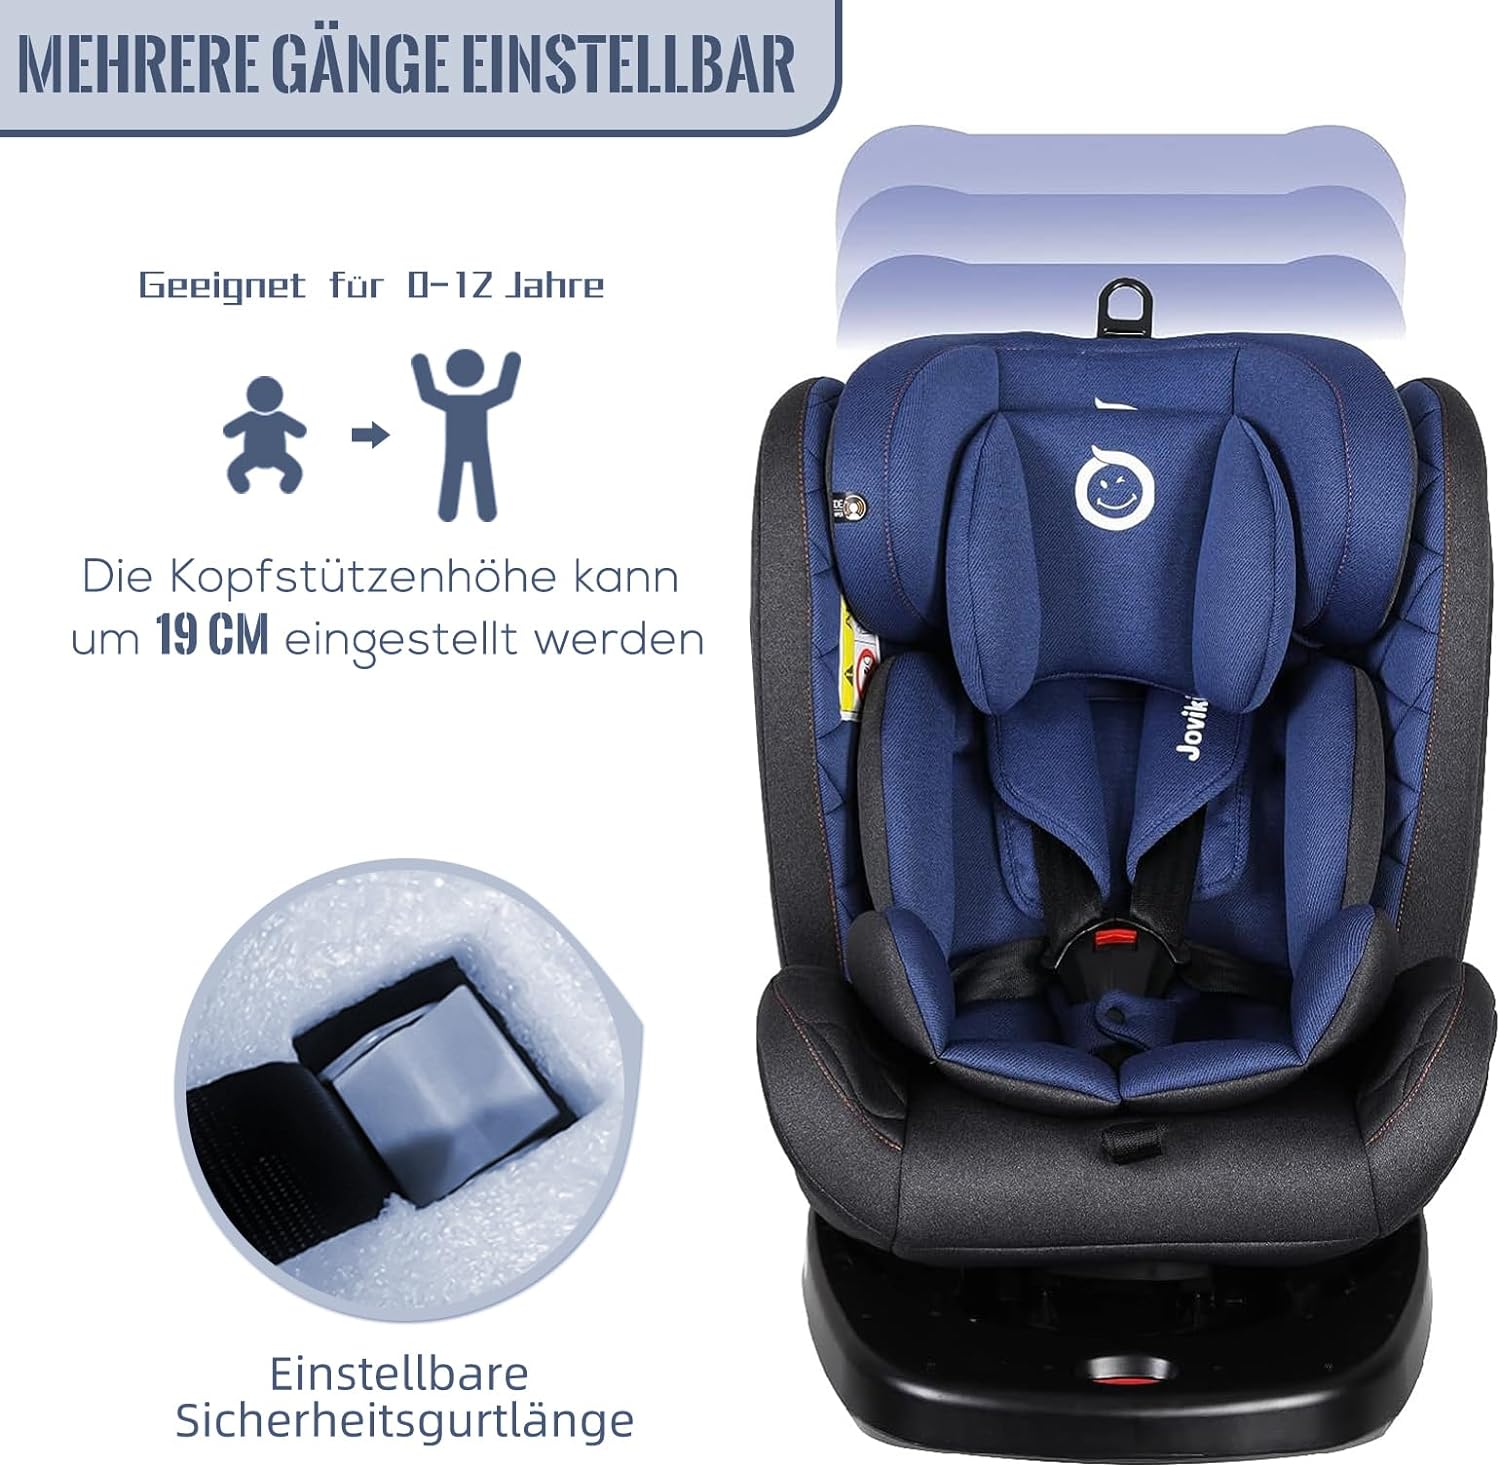 Isofix with Top Tether, 360 Degree Swivel Car Seat Blue, Group 0/1/2/3, 0-12 Years Old